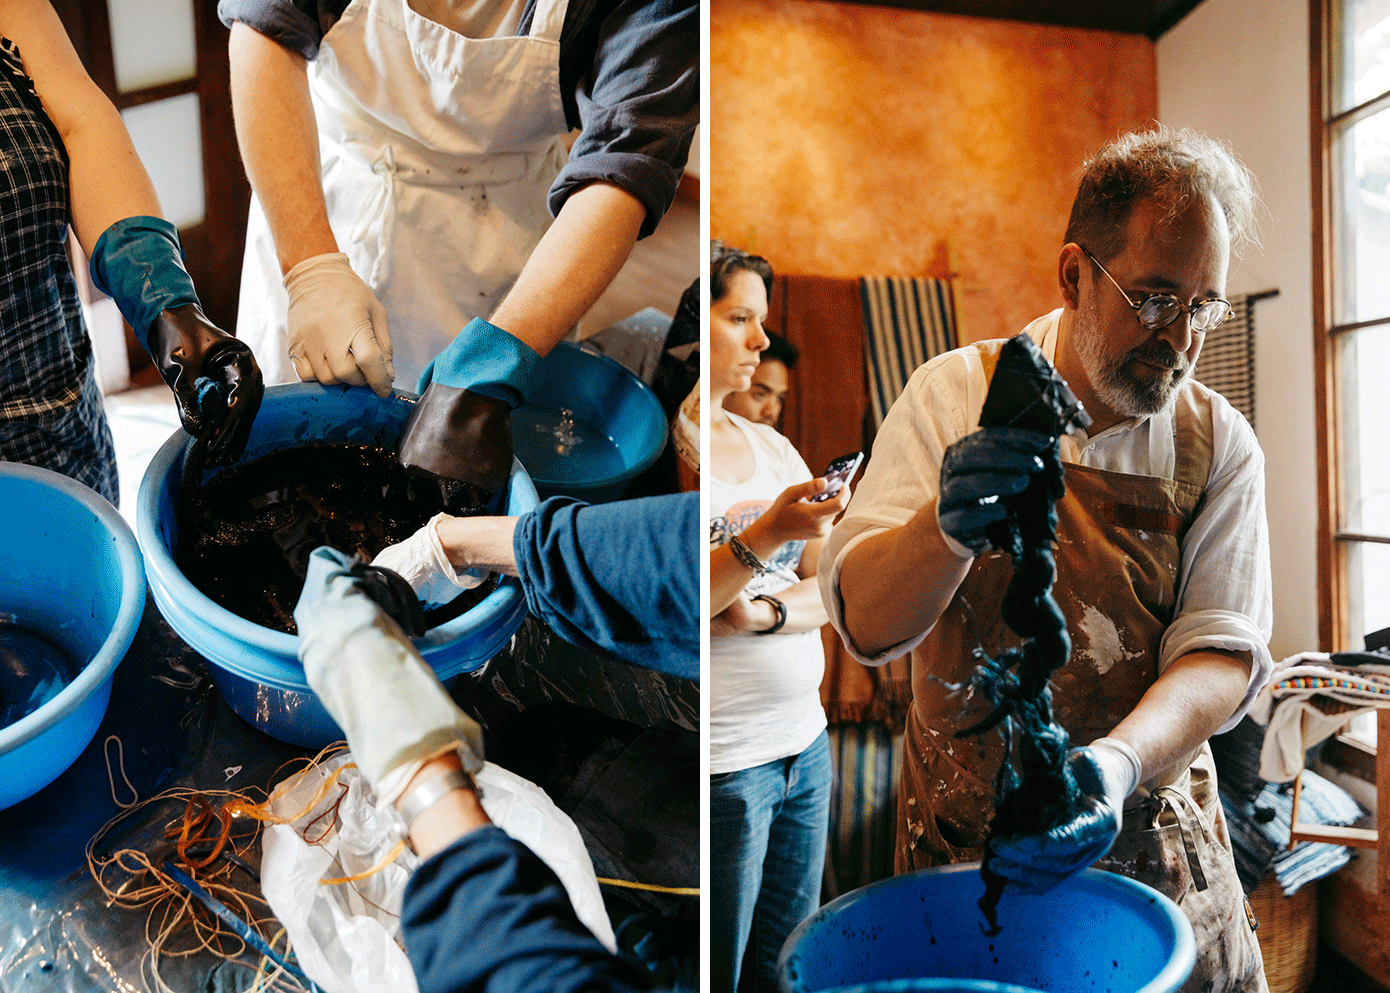 On the left, hands covered in plastic gloves reach into a bucket of dye. On the right, a man with plastic gloves wrings out a wet textile.